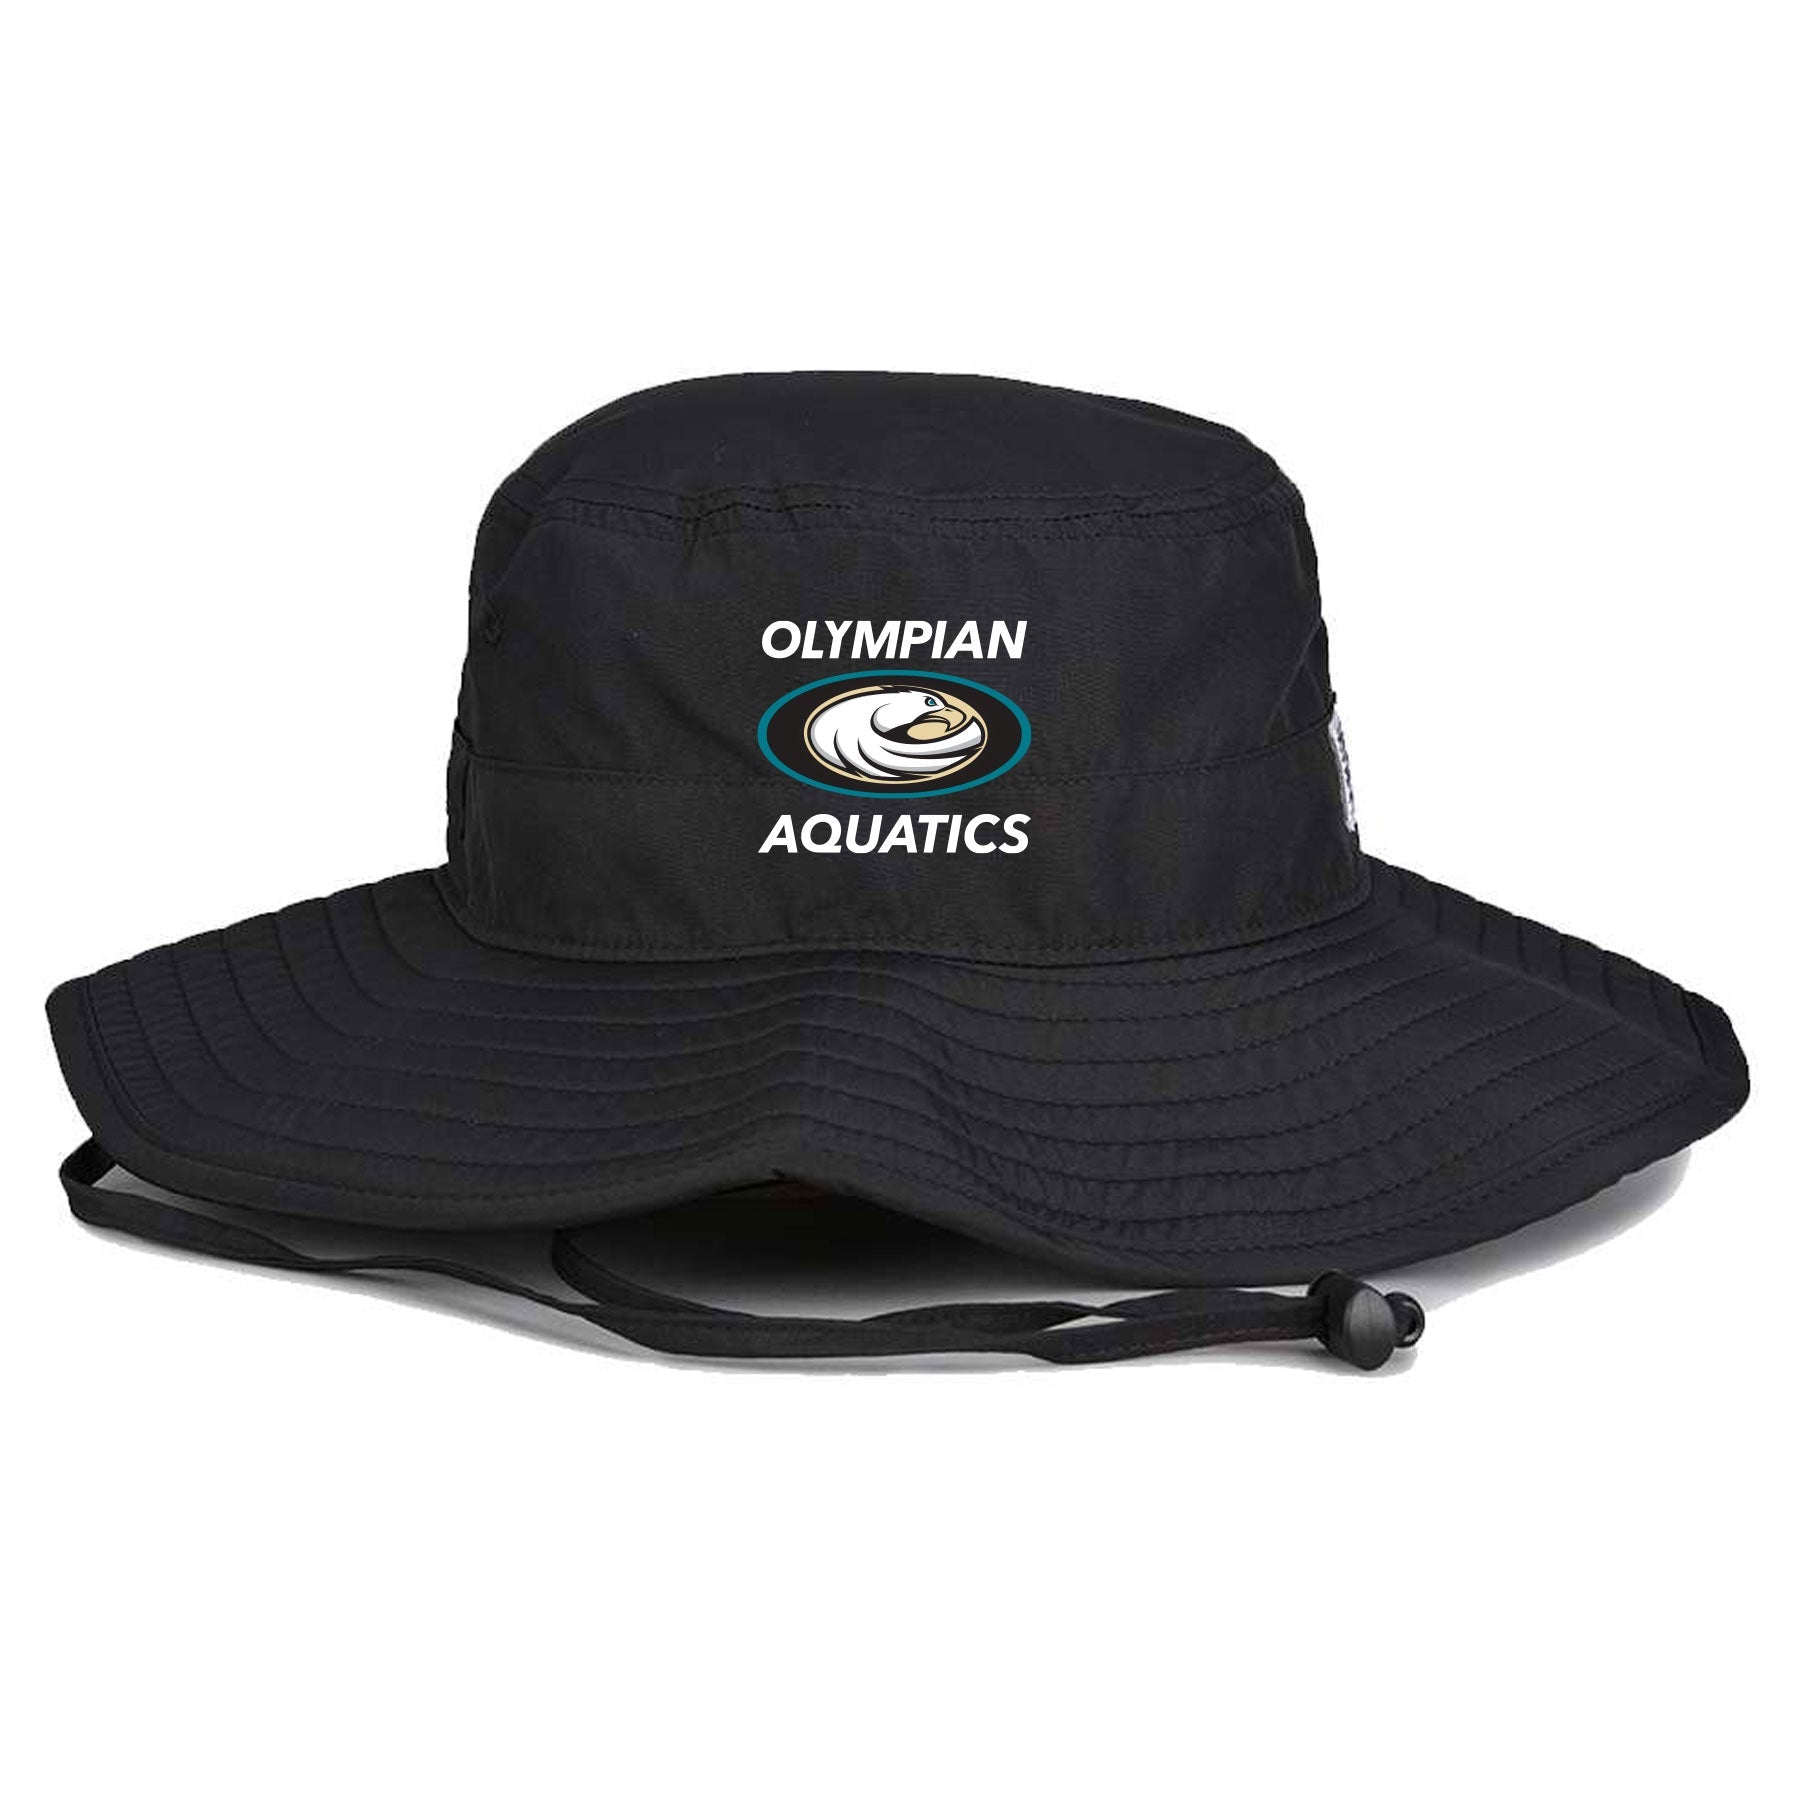 OLYMPIAN AQUATICS STACKED EMBROIDERED BOONEY HAT